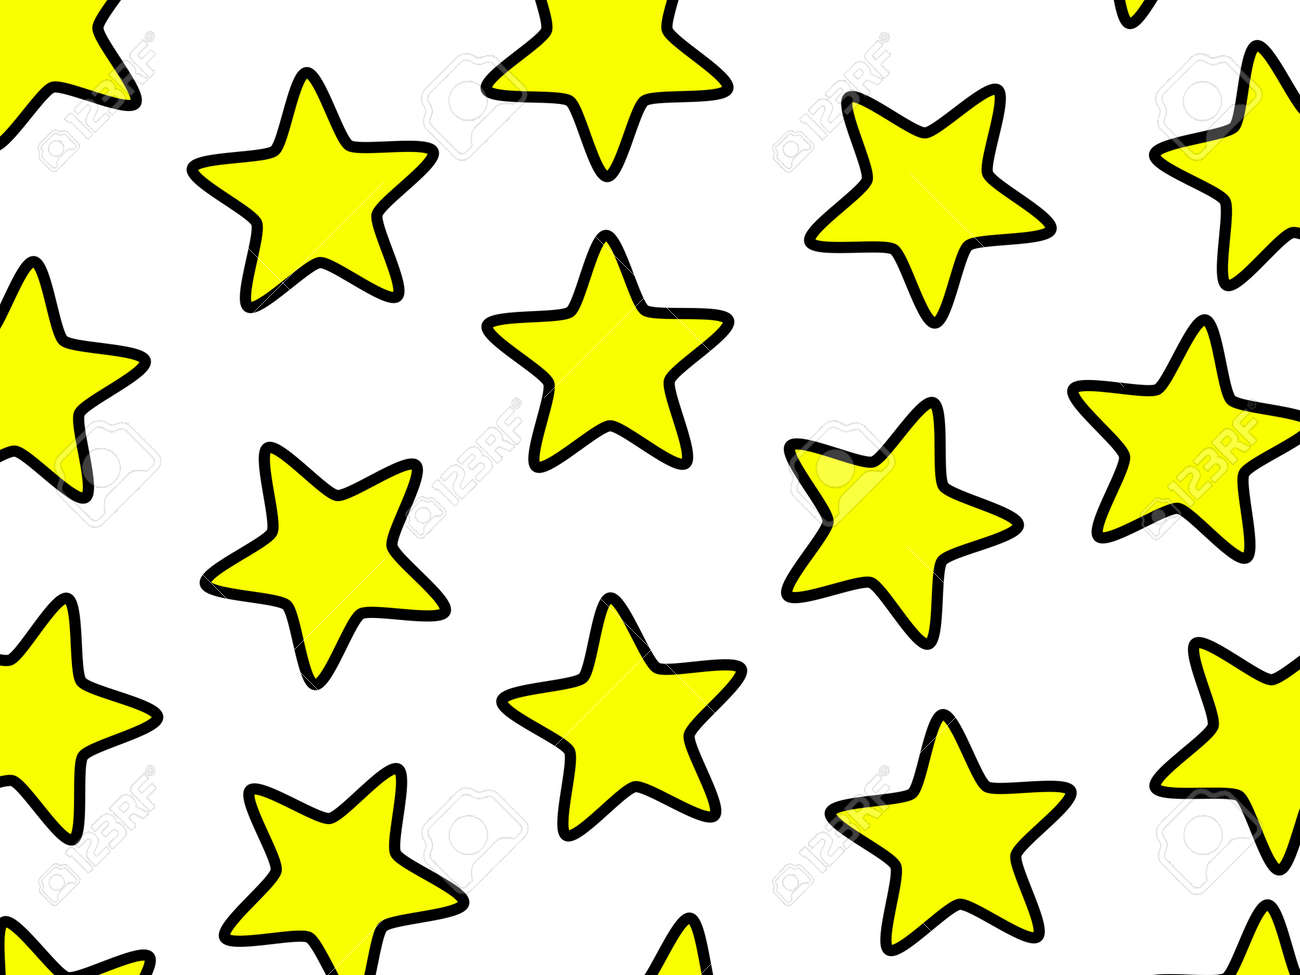 Yellow star template containing random elements high definition concept stock photo picture and royalty free image image